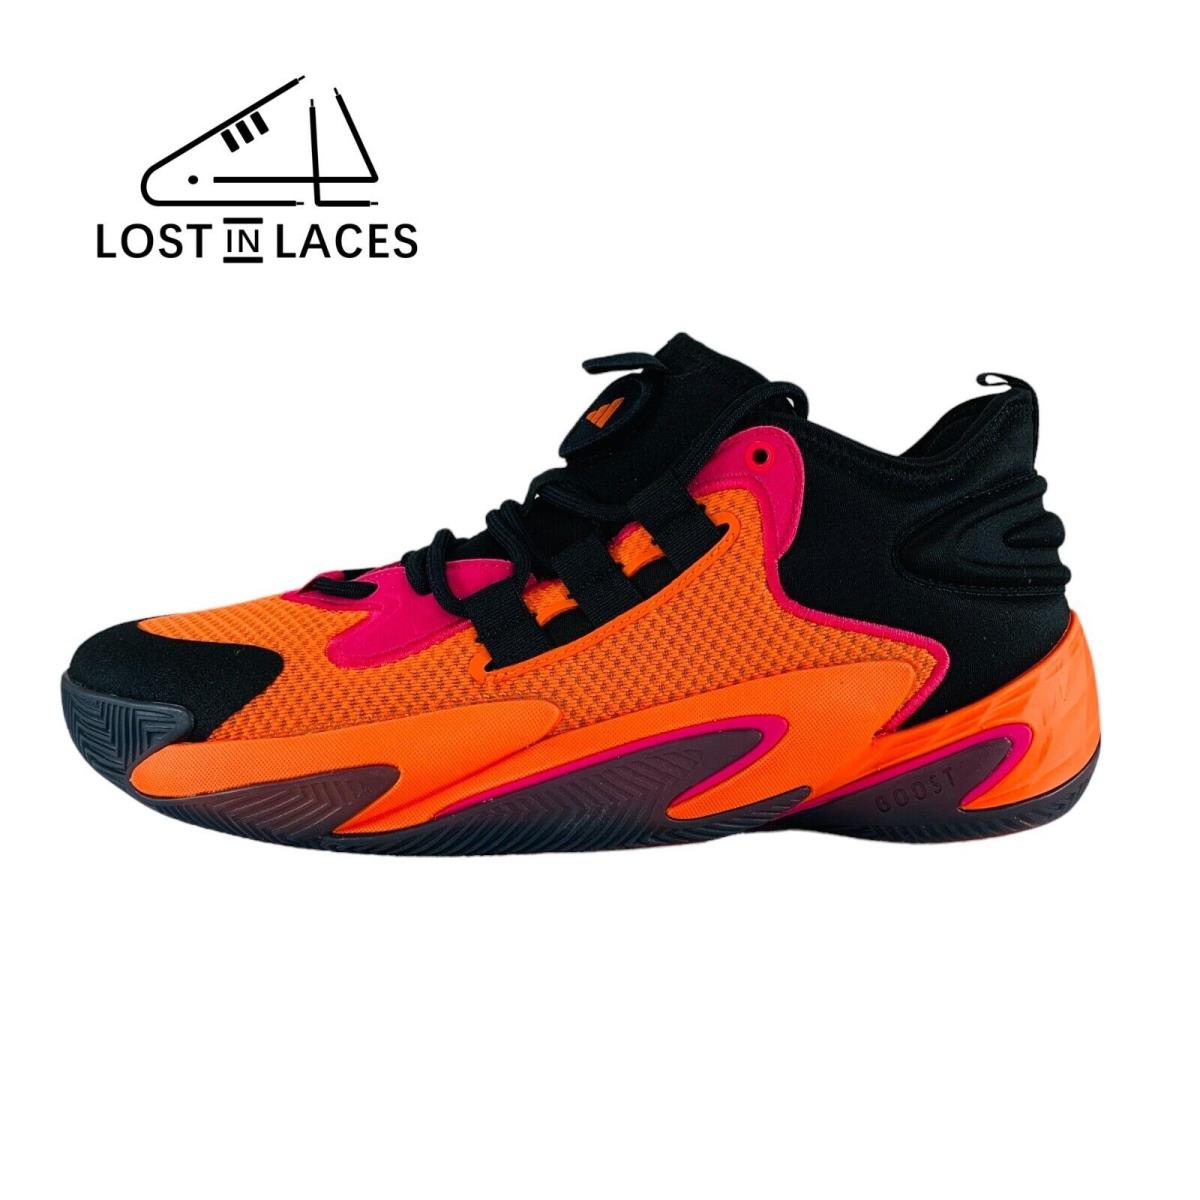 Adidas Byw Select Orange Black Sneakers Basketball Shoes Men`s Sizes